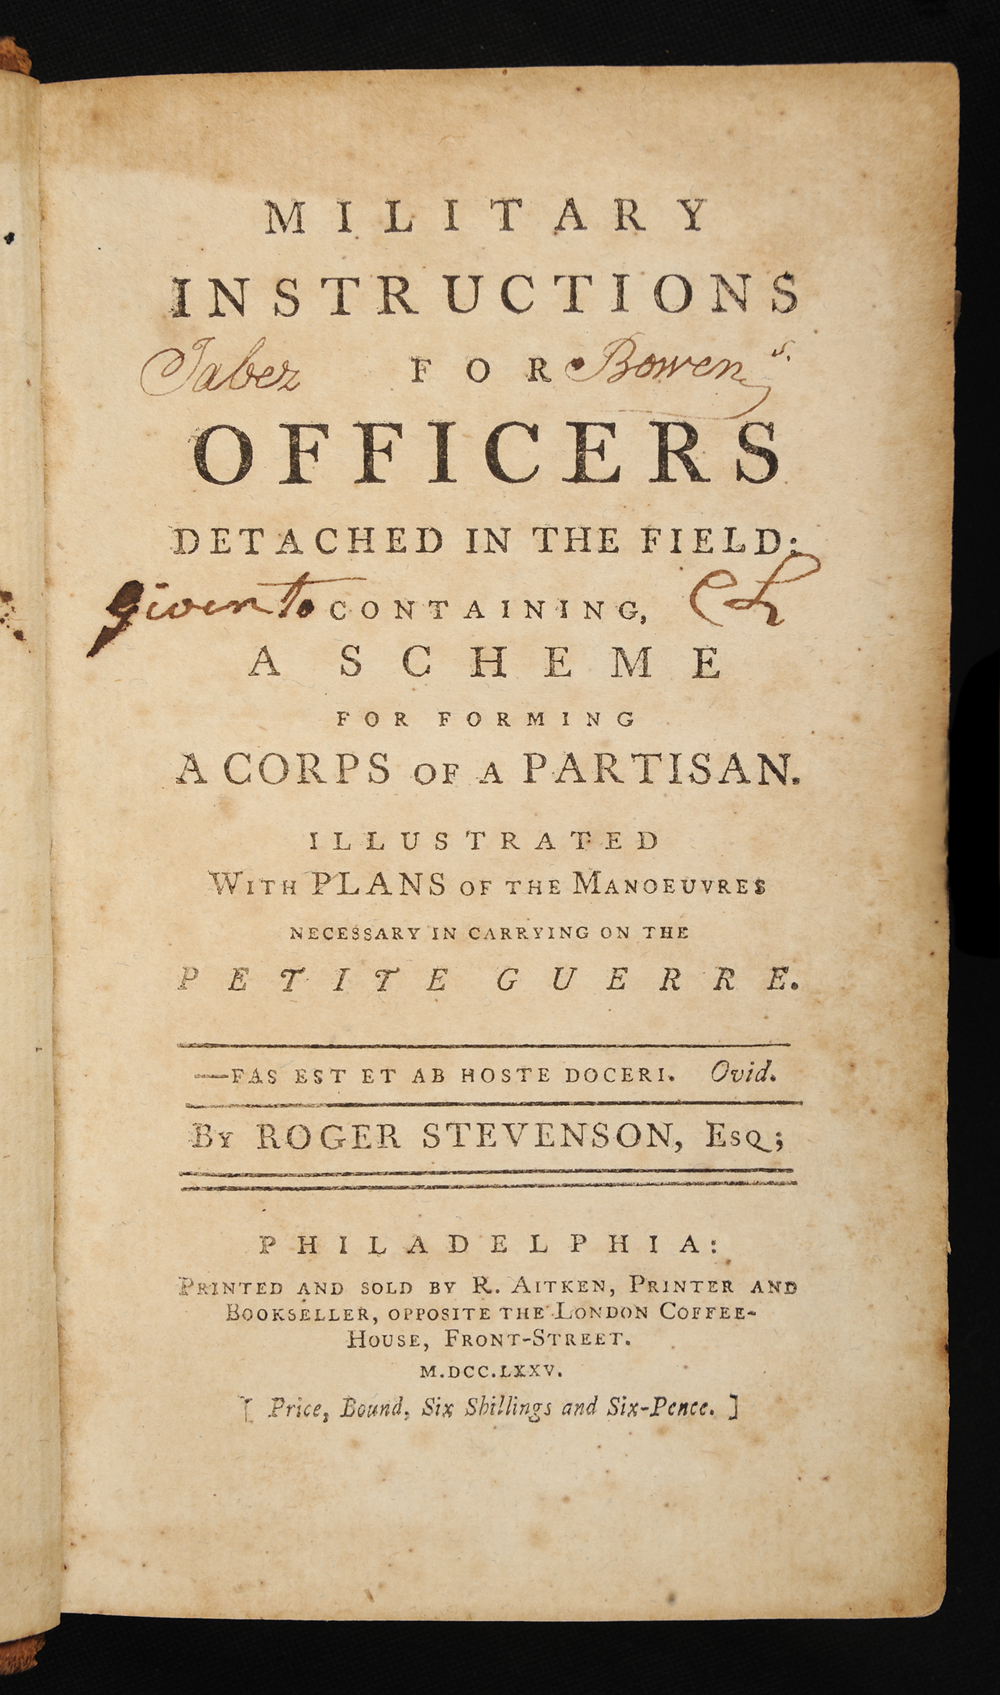 <em>Military Instructions for Officers Detached in the Field</em> by Roger Stevenson, 1775